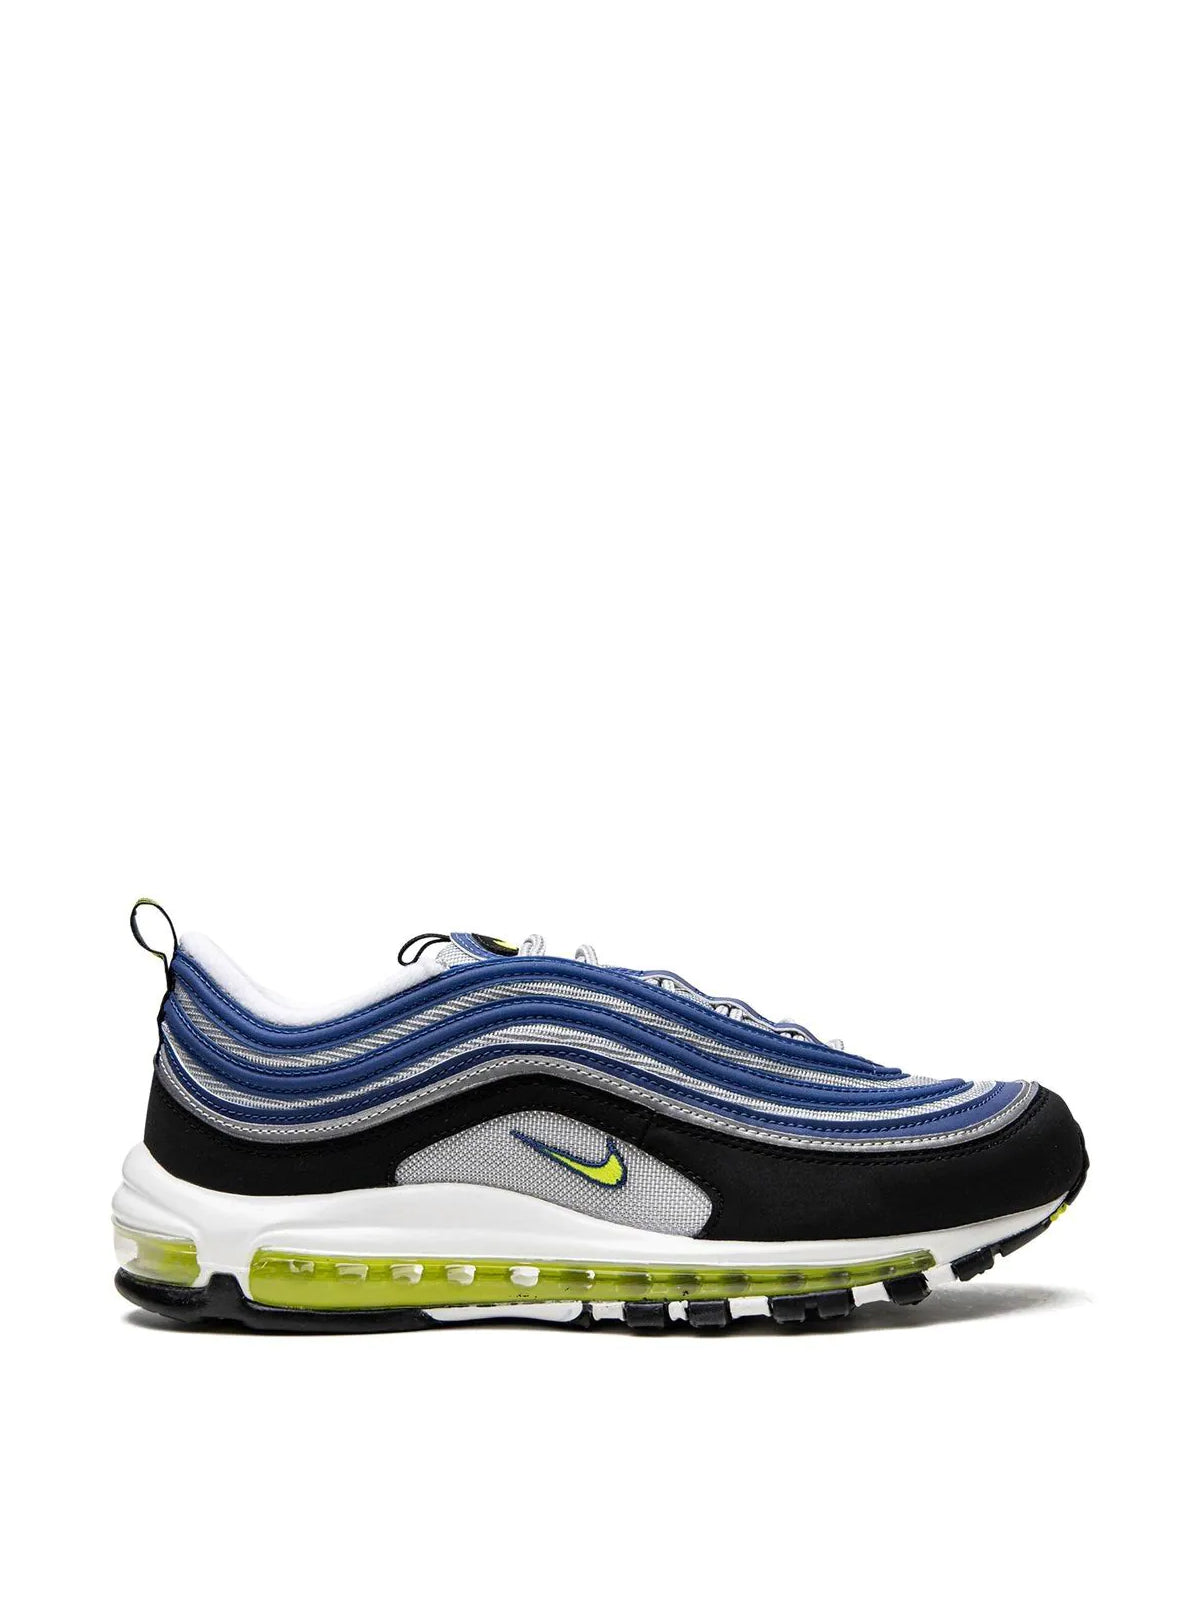 Nike-OUTLET-SALE-Air Max 97 OG Sneakers-ARCHIVIST